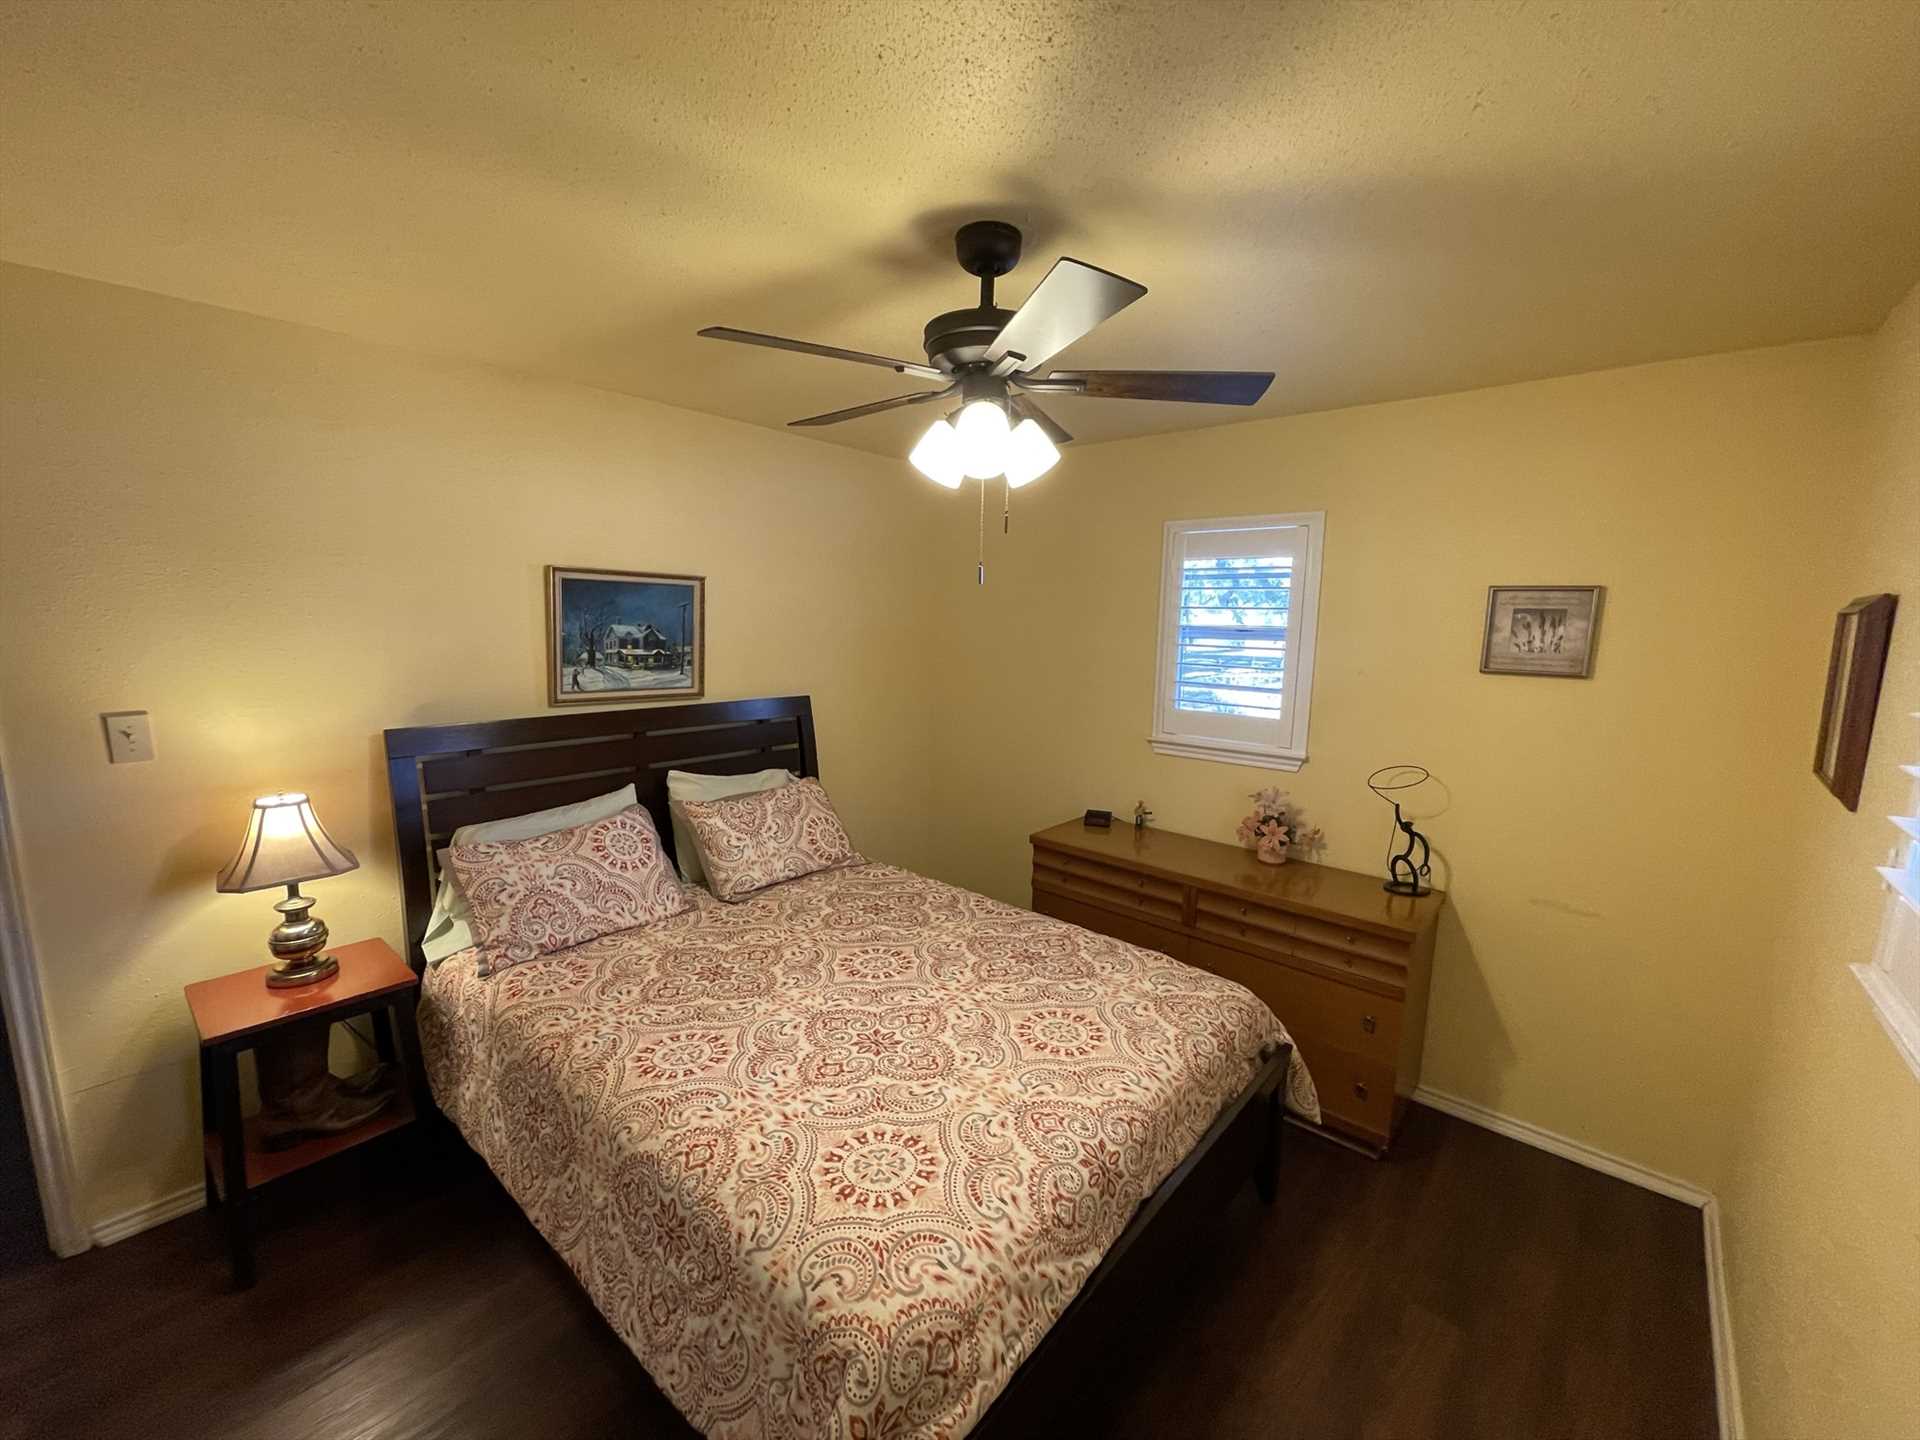                                                 An enormous and comfy king-sized bed adorns the master bedroom, and clean bed and bath linens are provided throughout the home.